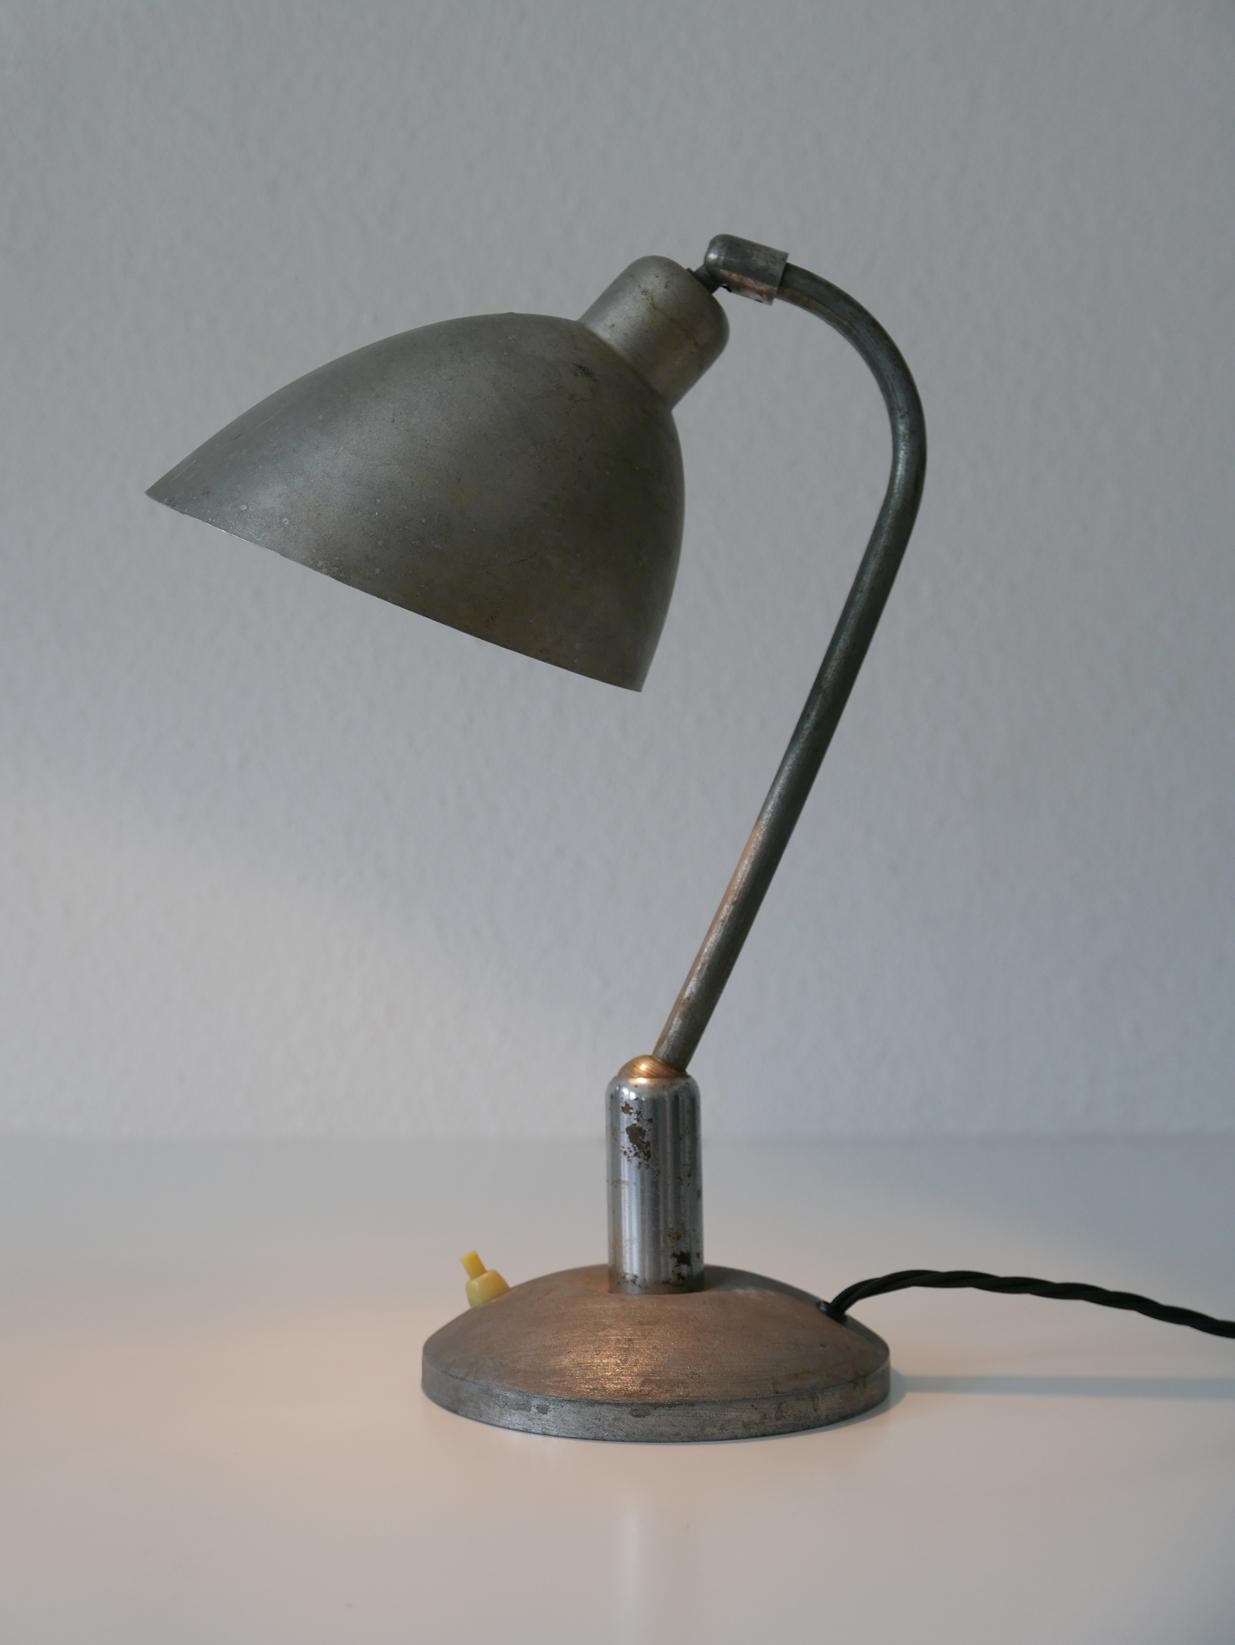 Extremely rare and articulated Czech functionalist table lamp. Designed by the Czech functionalist architect Frantisek or Franta Anyz in 1920s. Manufactured in 1920s in Czech Republic.

Executed in aluminium and steel. The lamp needs 1 x E27 Edison